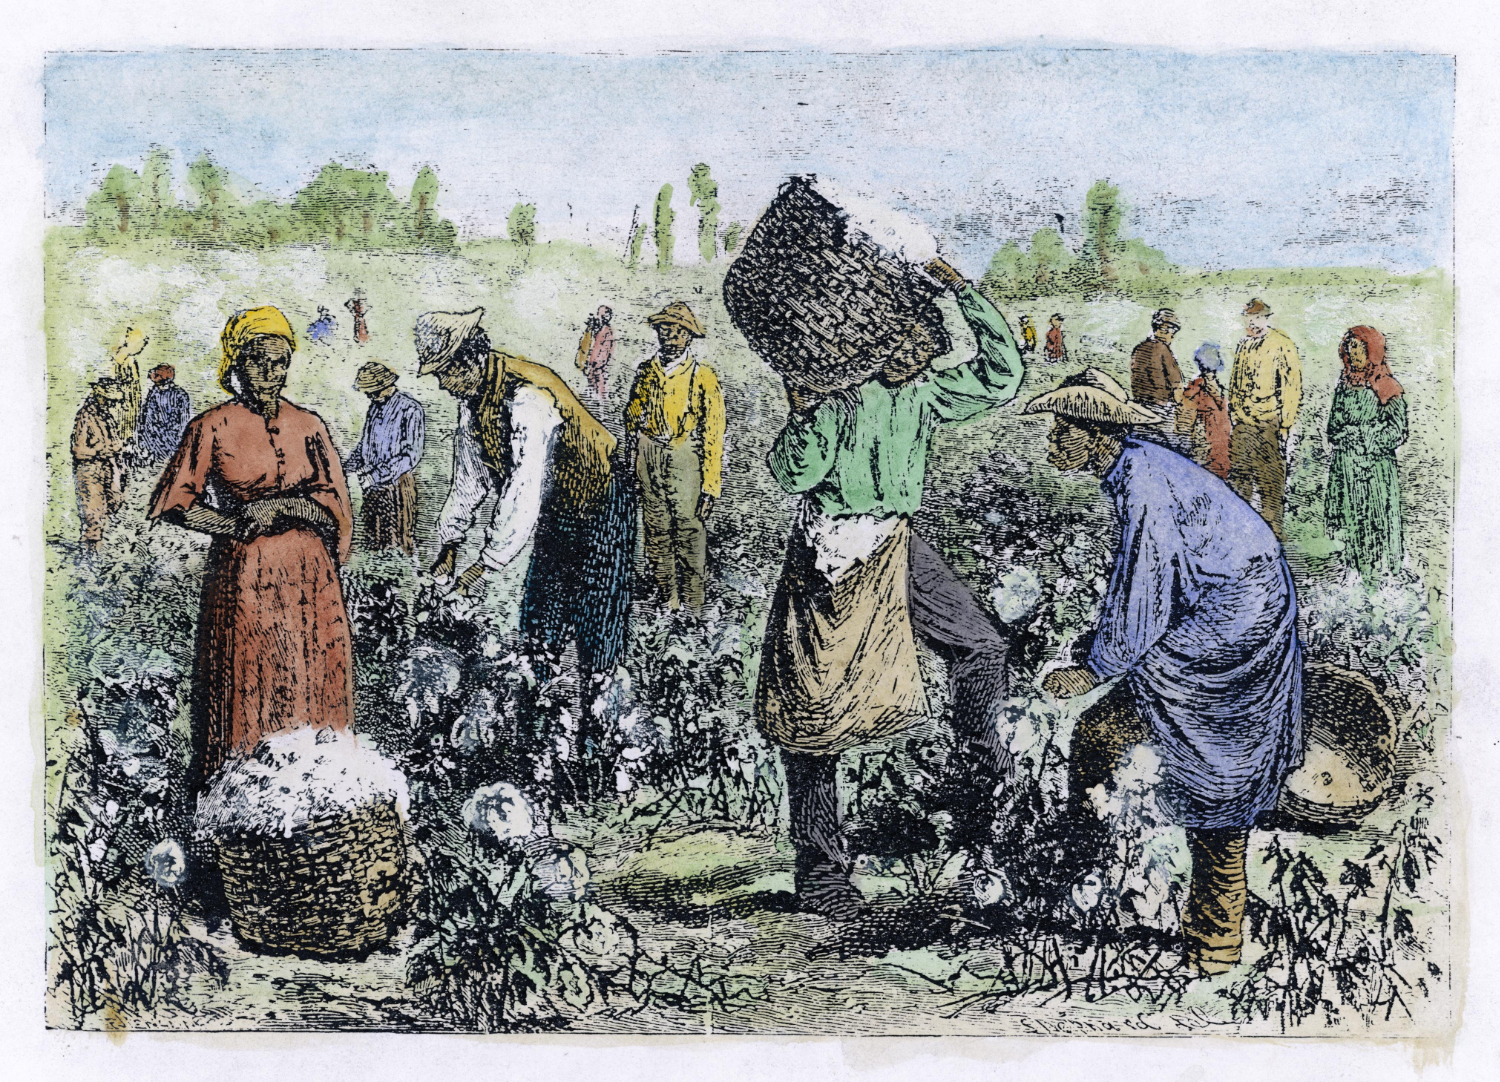 Enslaved Lady symbolizing Eulalie Jacob standing in cotton fields